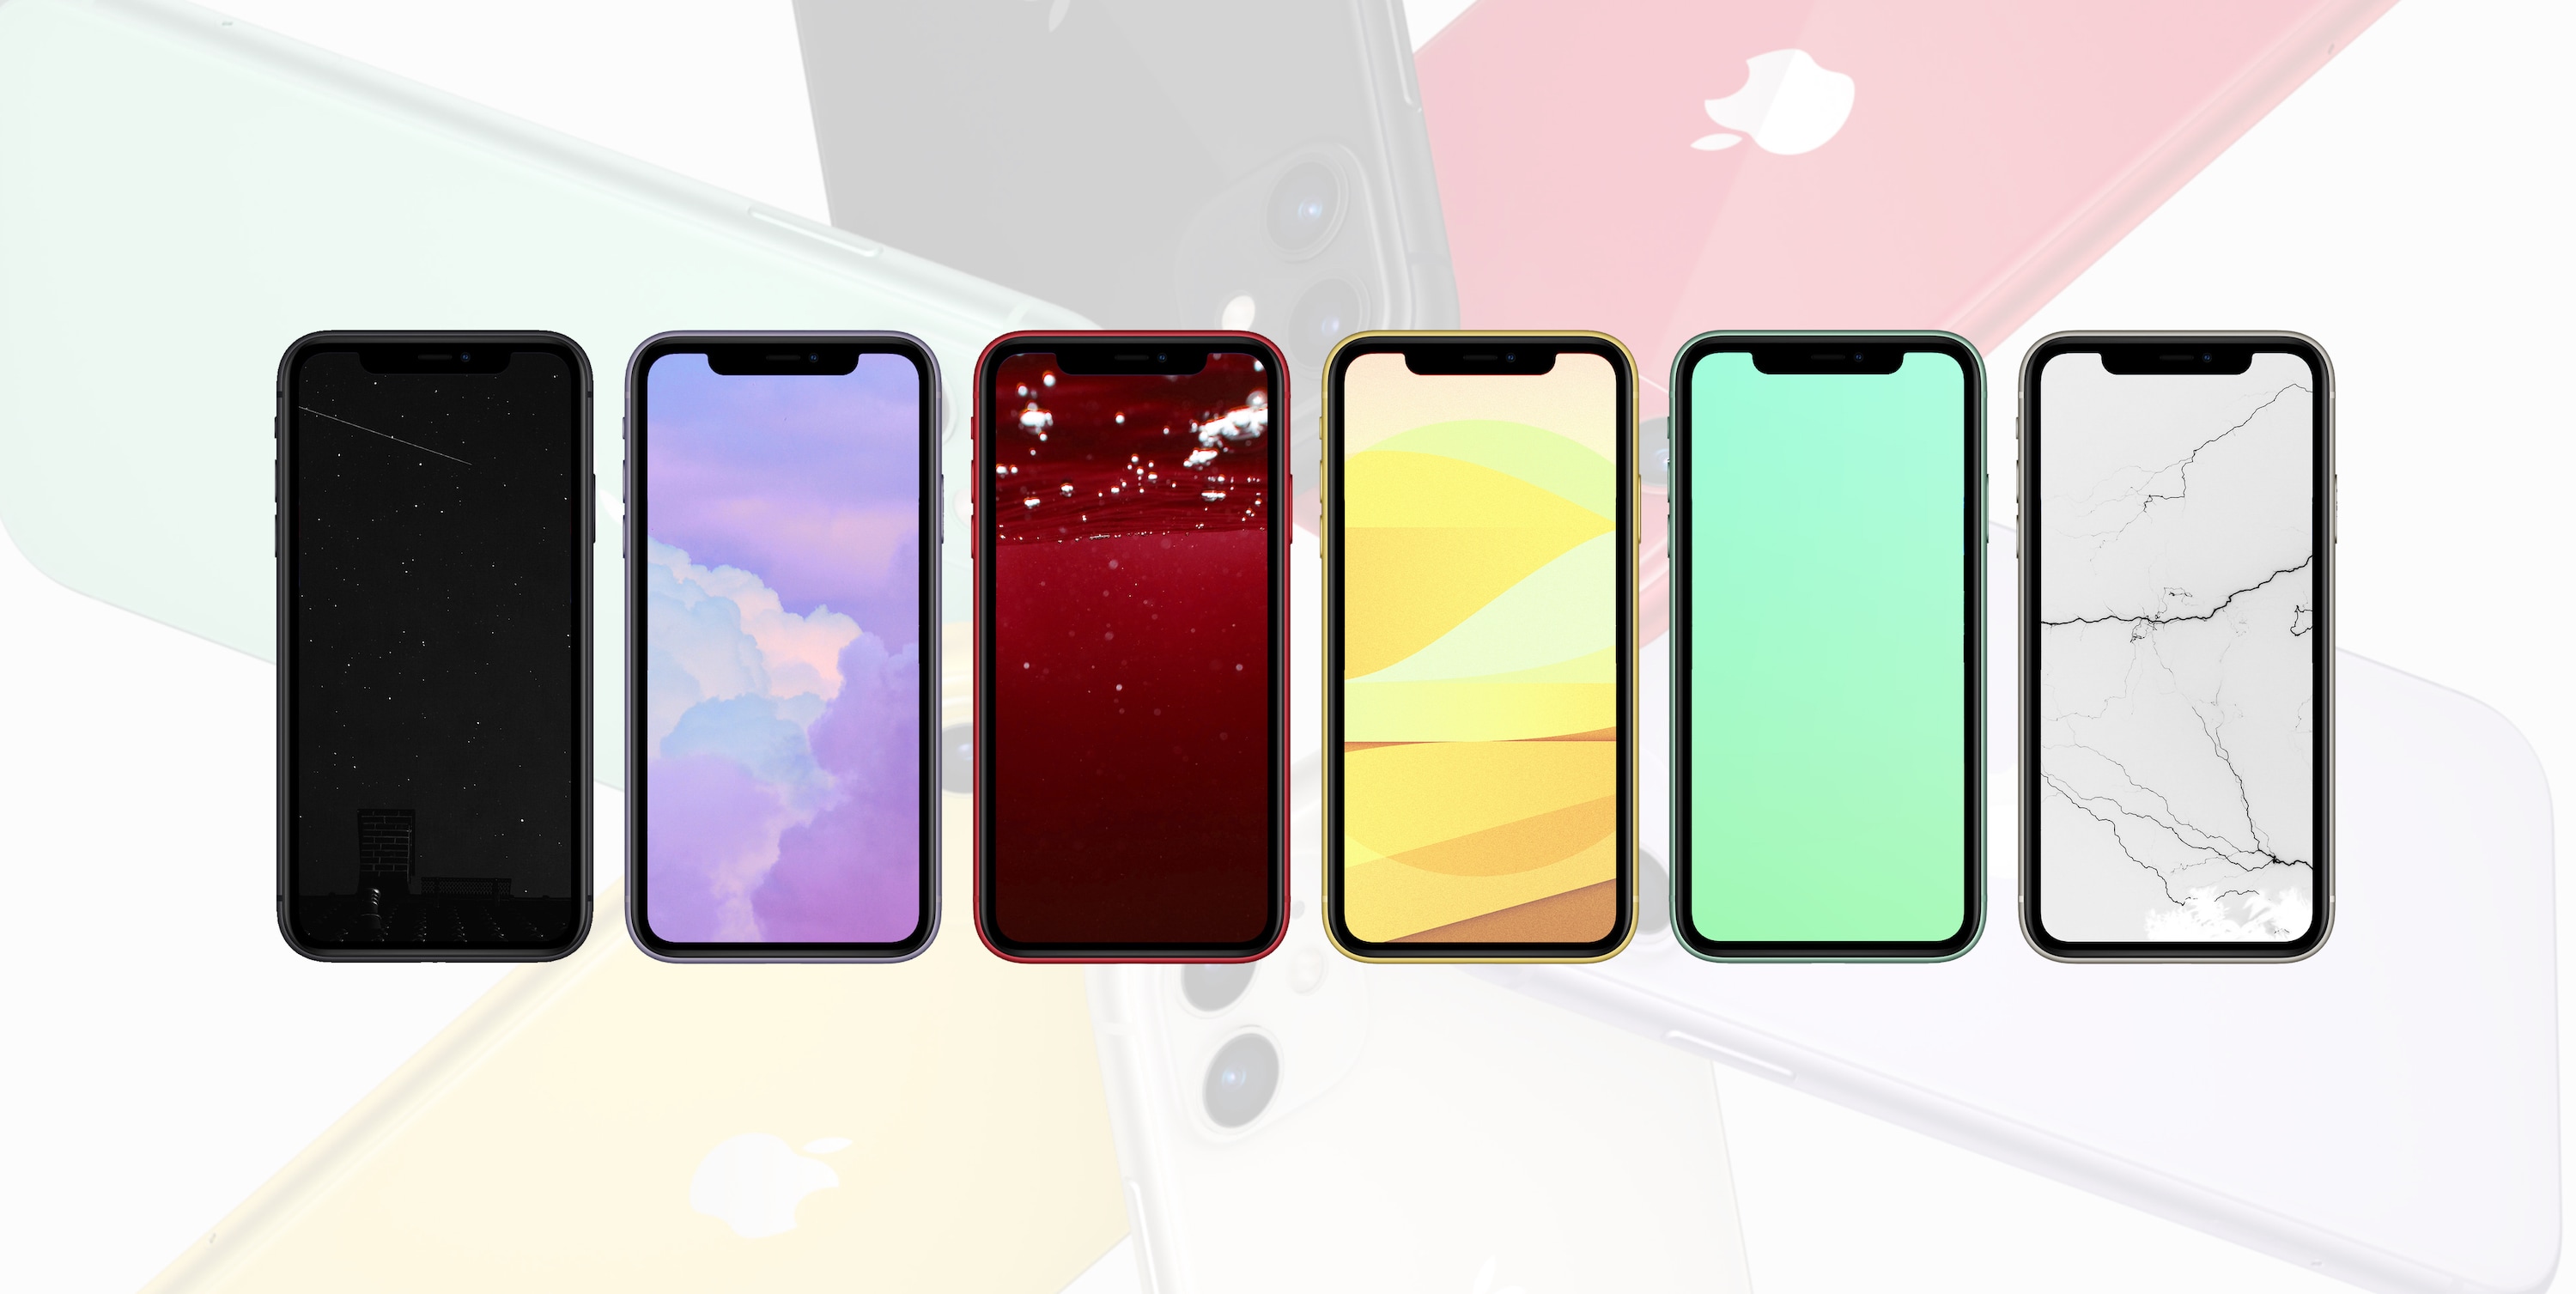 iPhone 11 wallpapers in matching colors